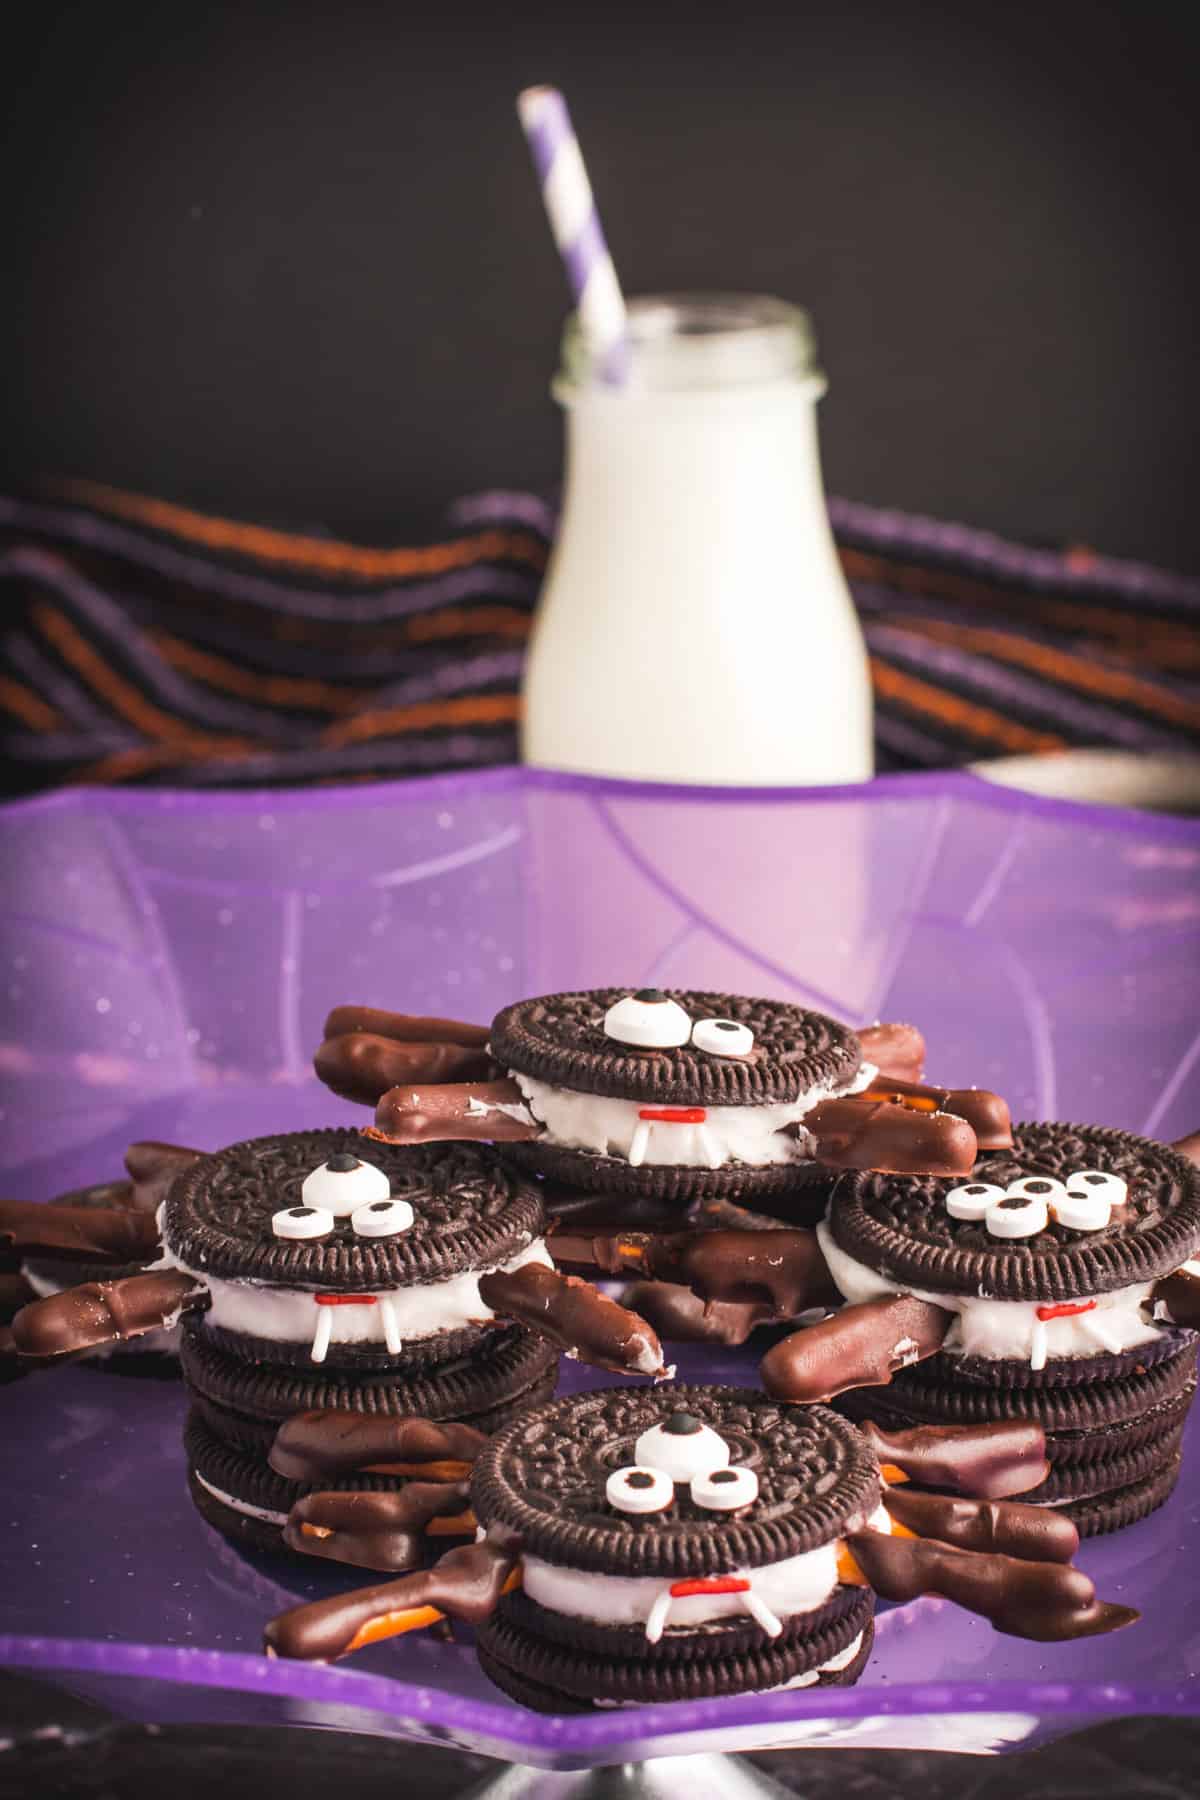 Oreo Spider cookies in the purple spider web plate with a glass of milk behind.